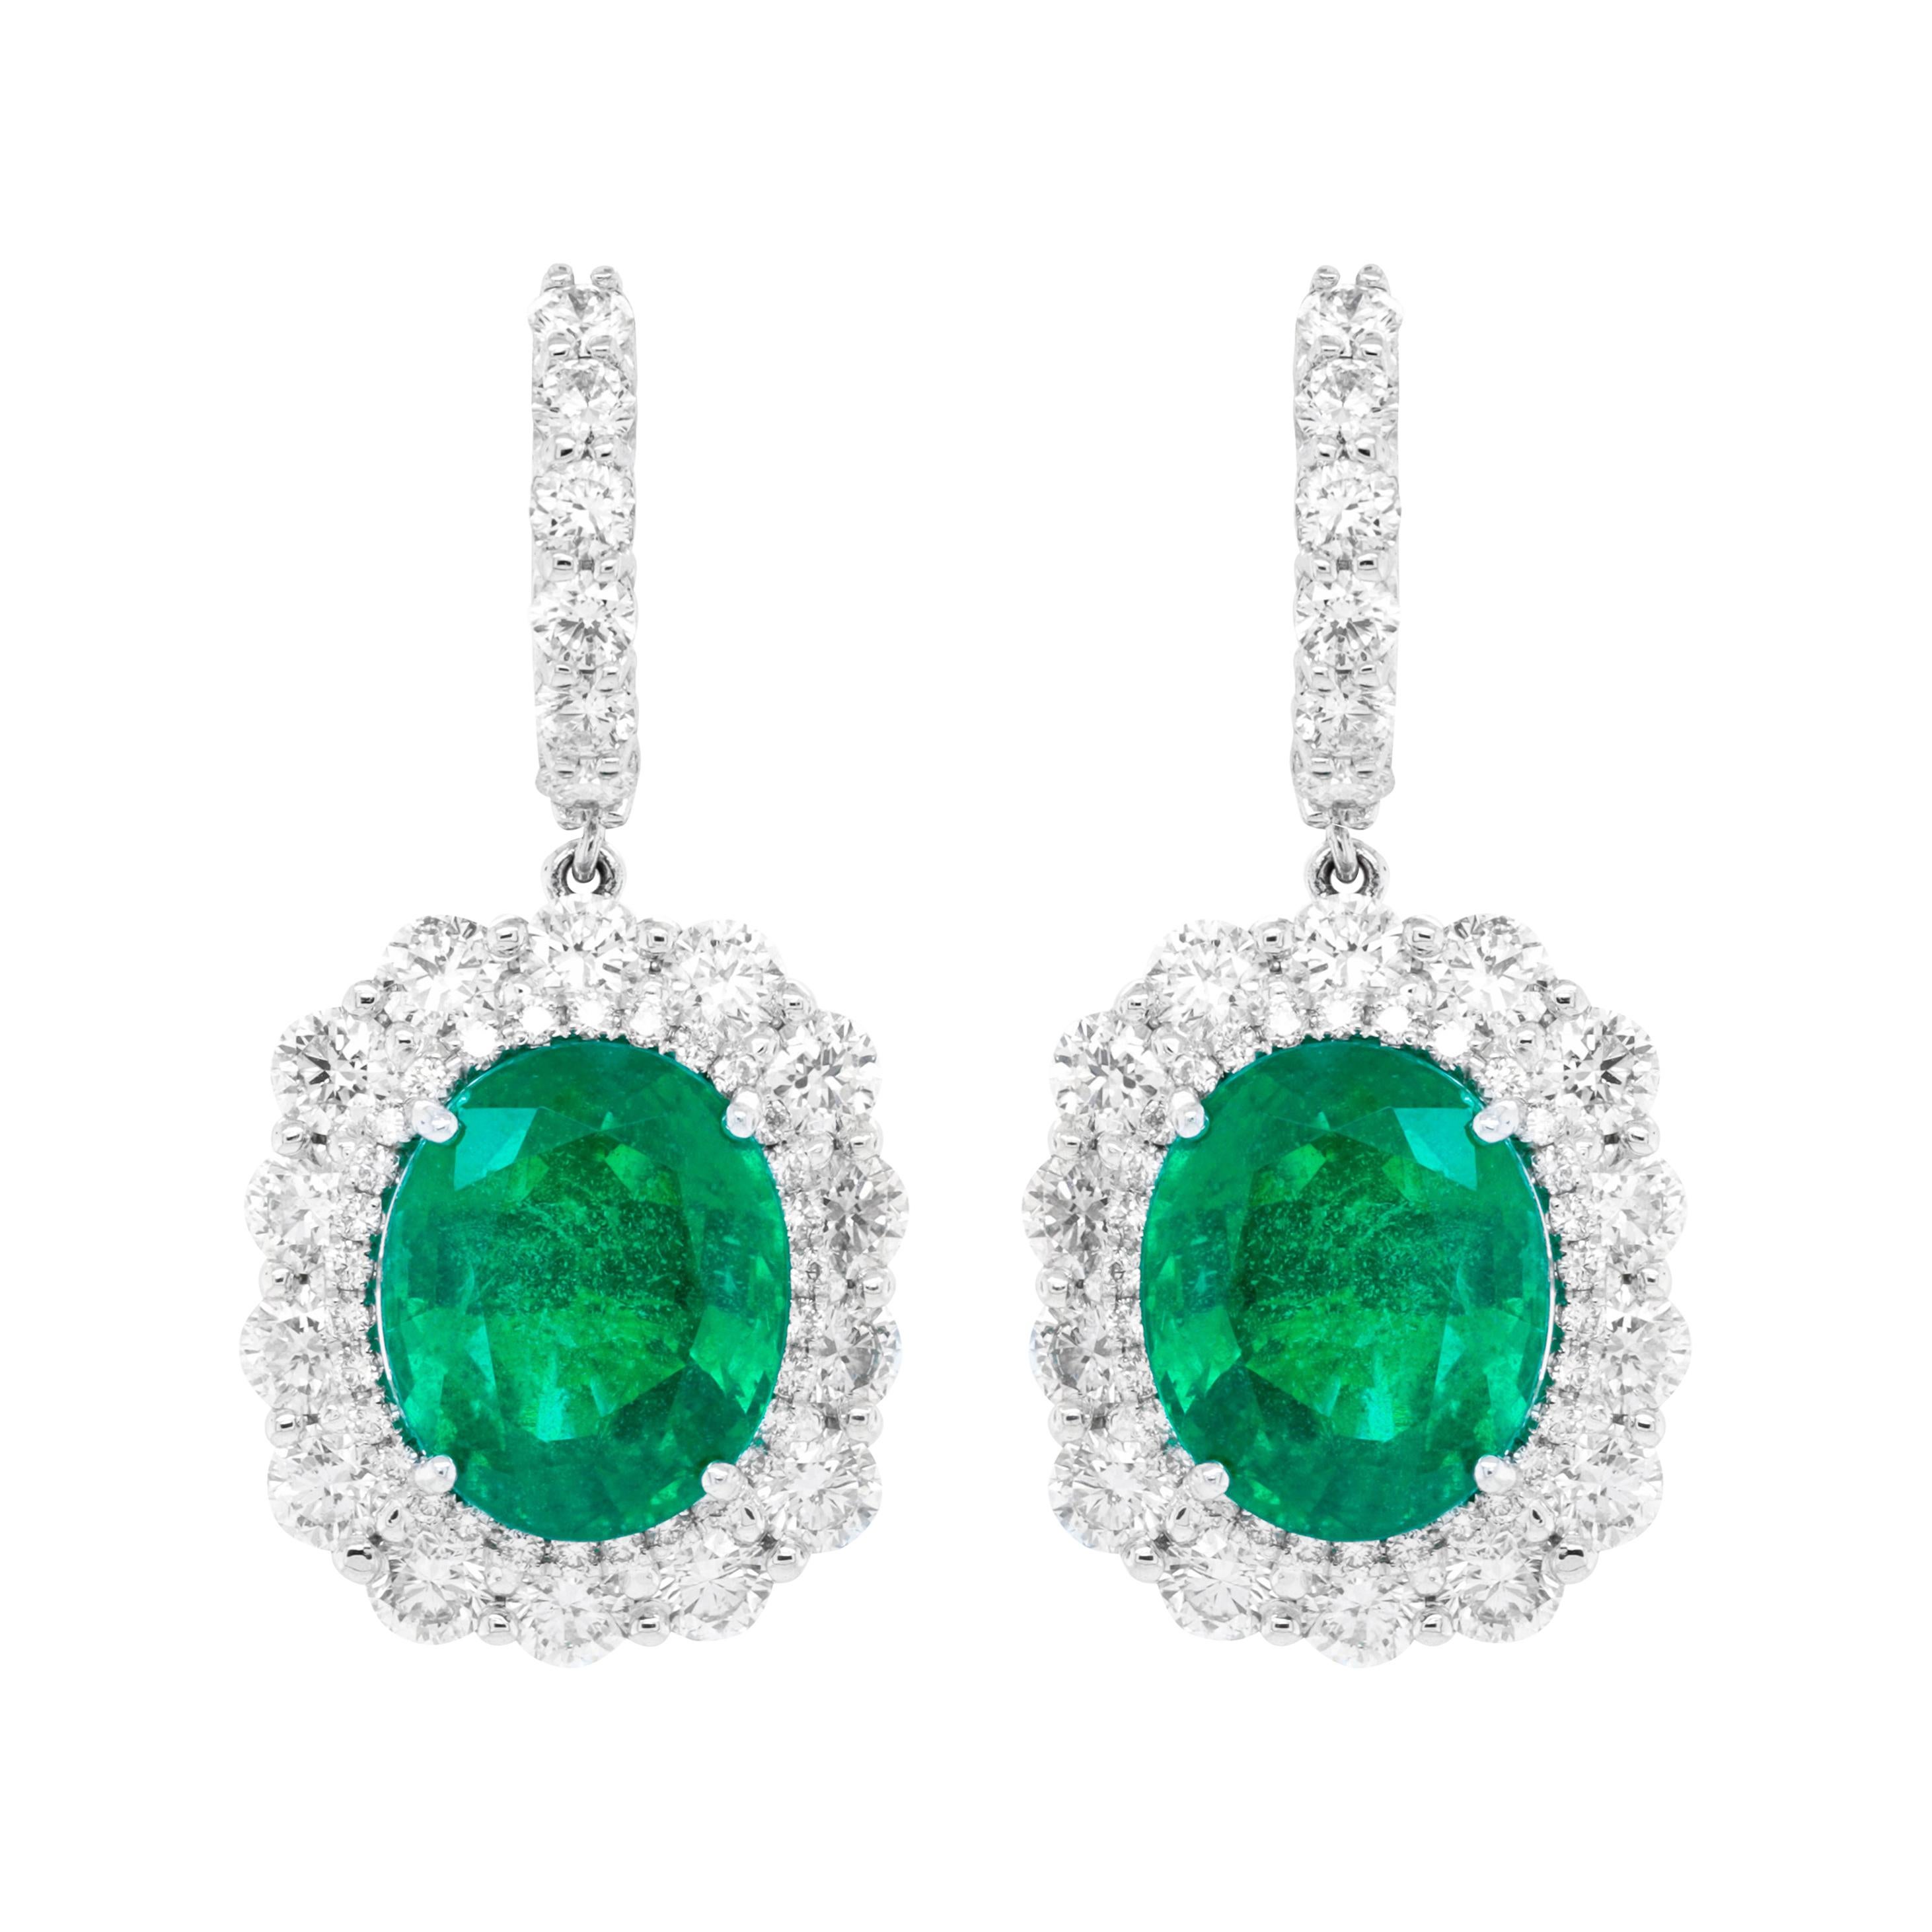 Diana M. 18KT White Gold Earrings with Oval Green Emerald & Round White Diamond